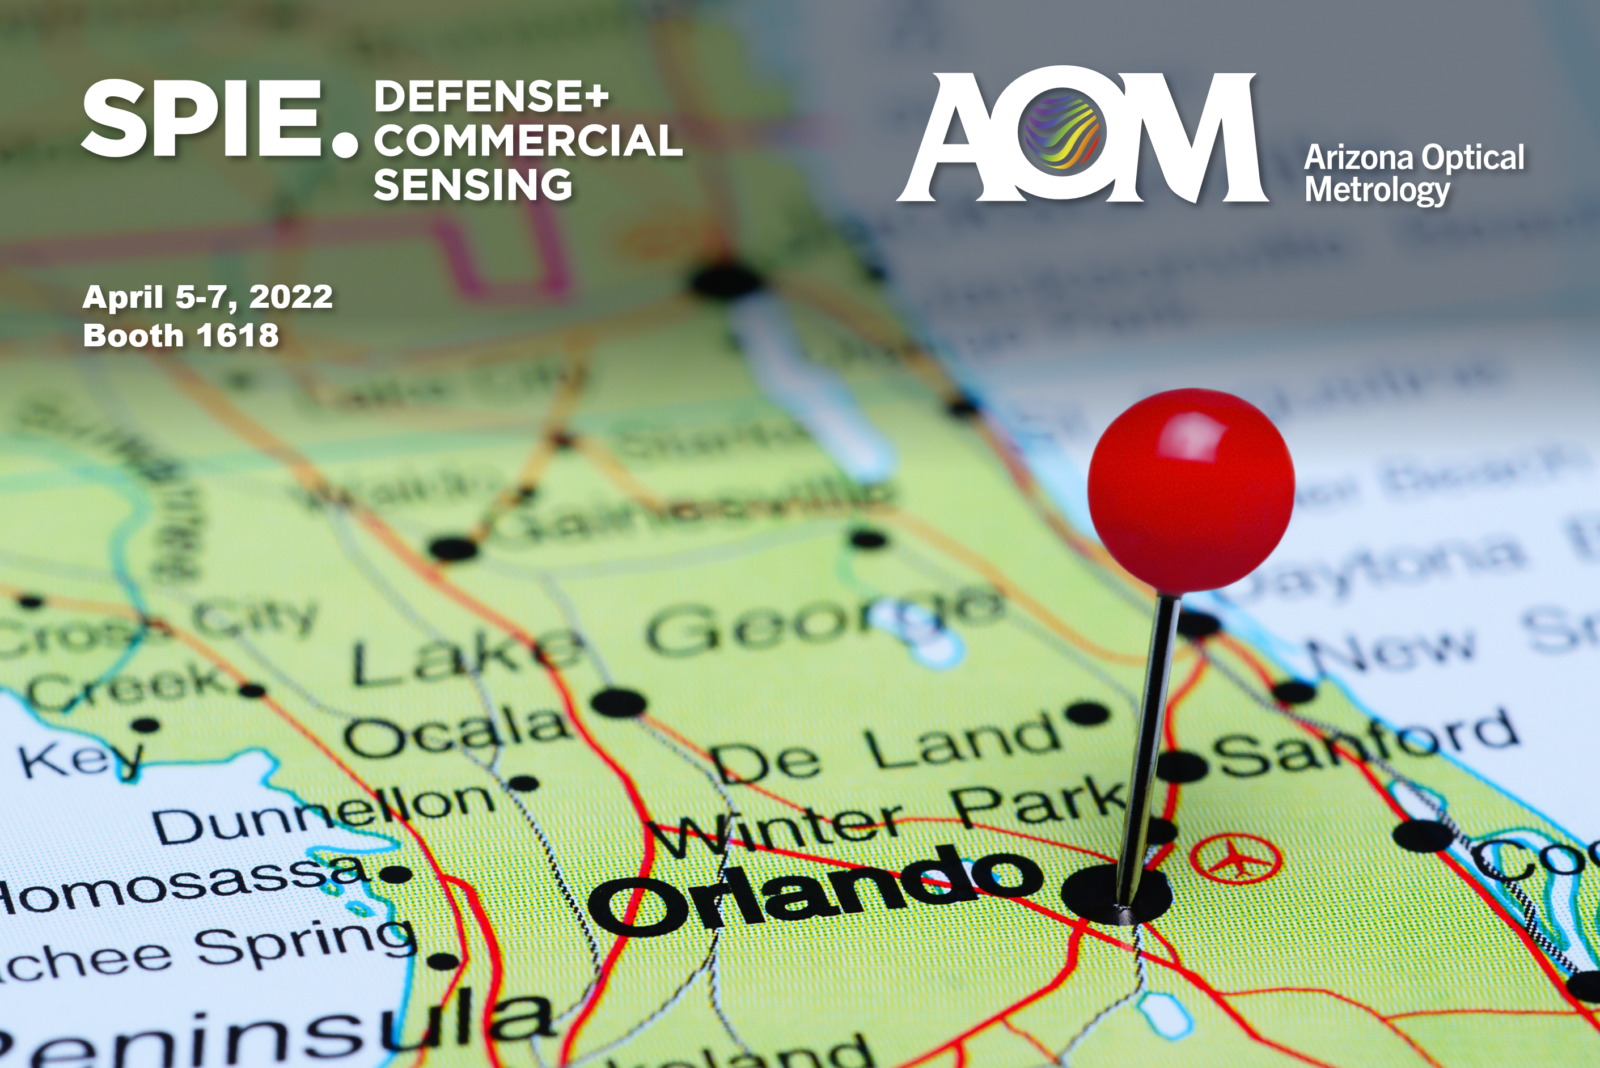 AOM to exhibit freeform metrology at SPIE DCS 2022, booth 1618